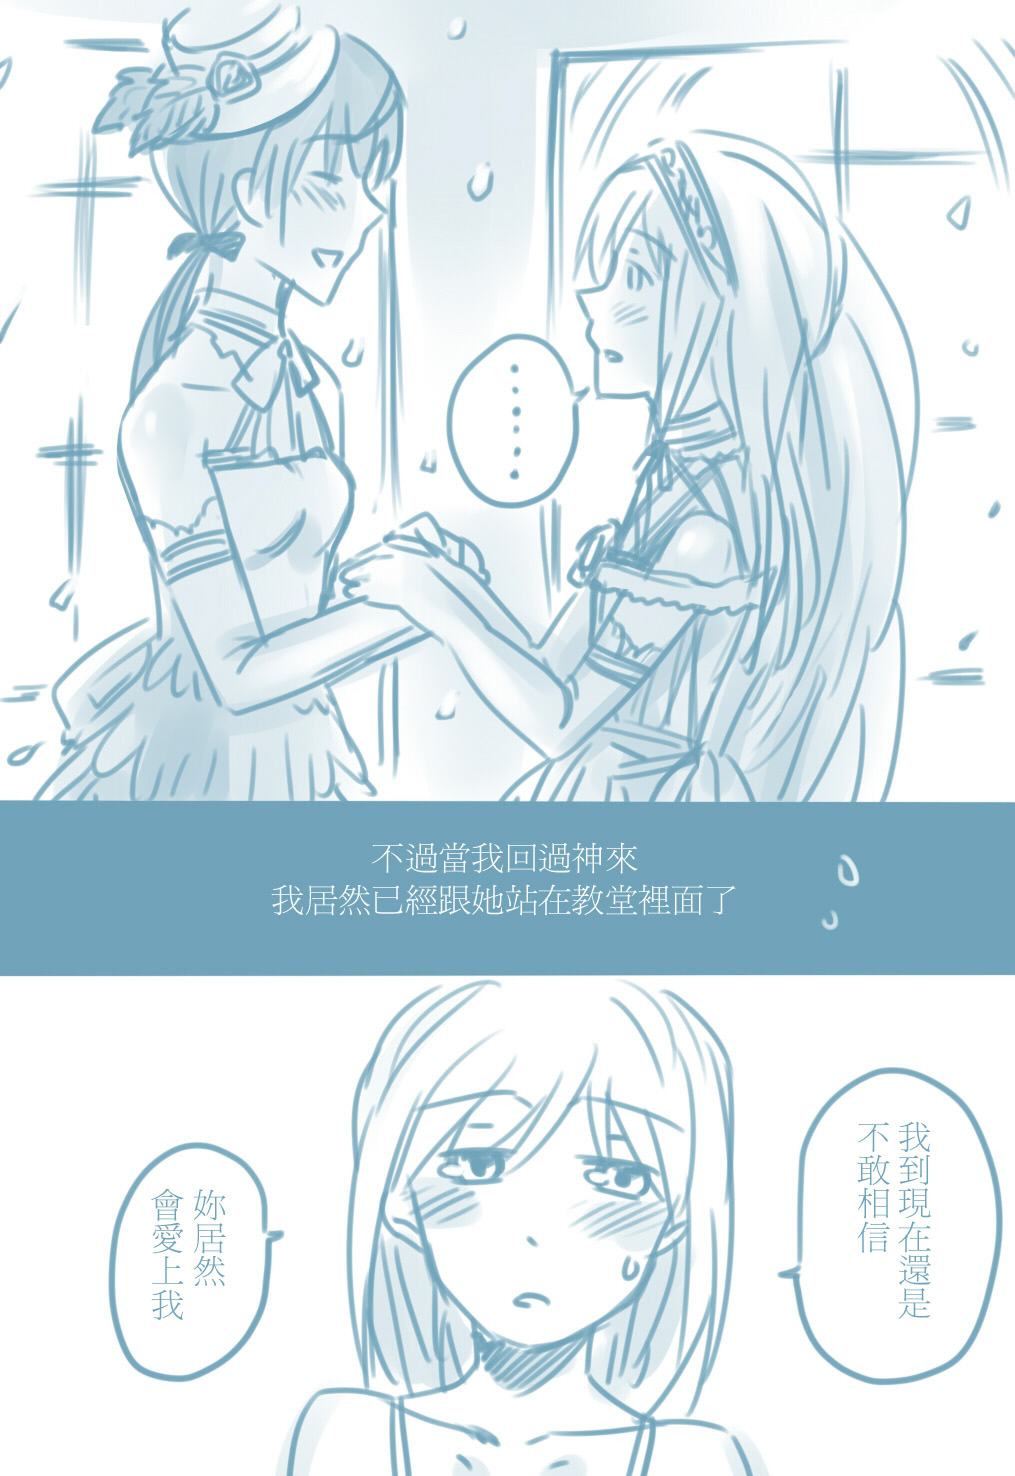 2girls background bai_lao_shu blue_background blush chinese closed_eyes comic couple dress erica_hartmann gertrud_barkhorn happy highres long_hair looking_at_another military monochrome multiple_girls open_mouth short_hair sleepy strike_witches tears translation_request twintails wedding wedding_dress yuri